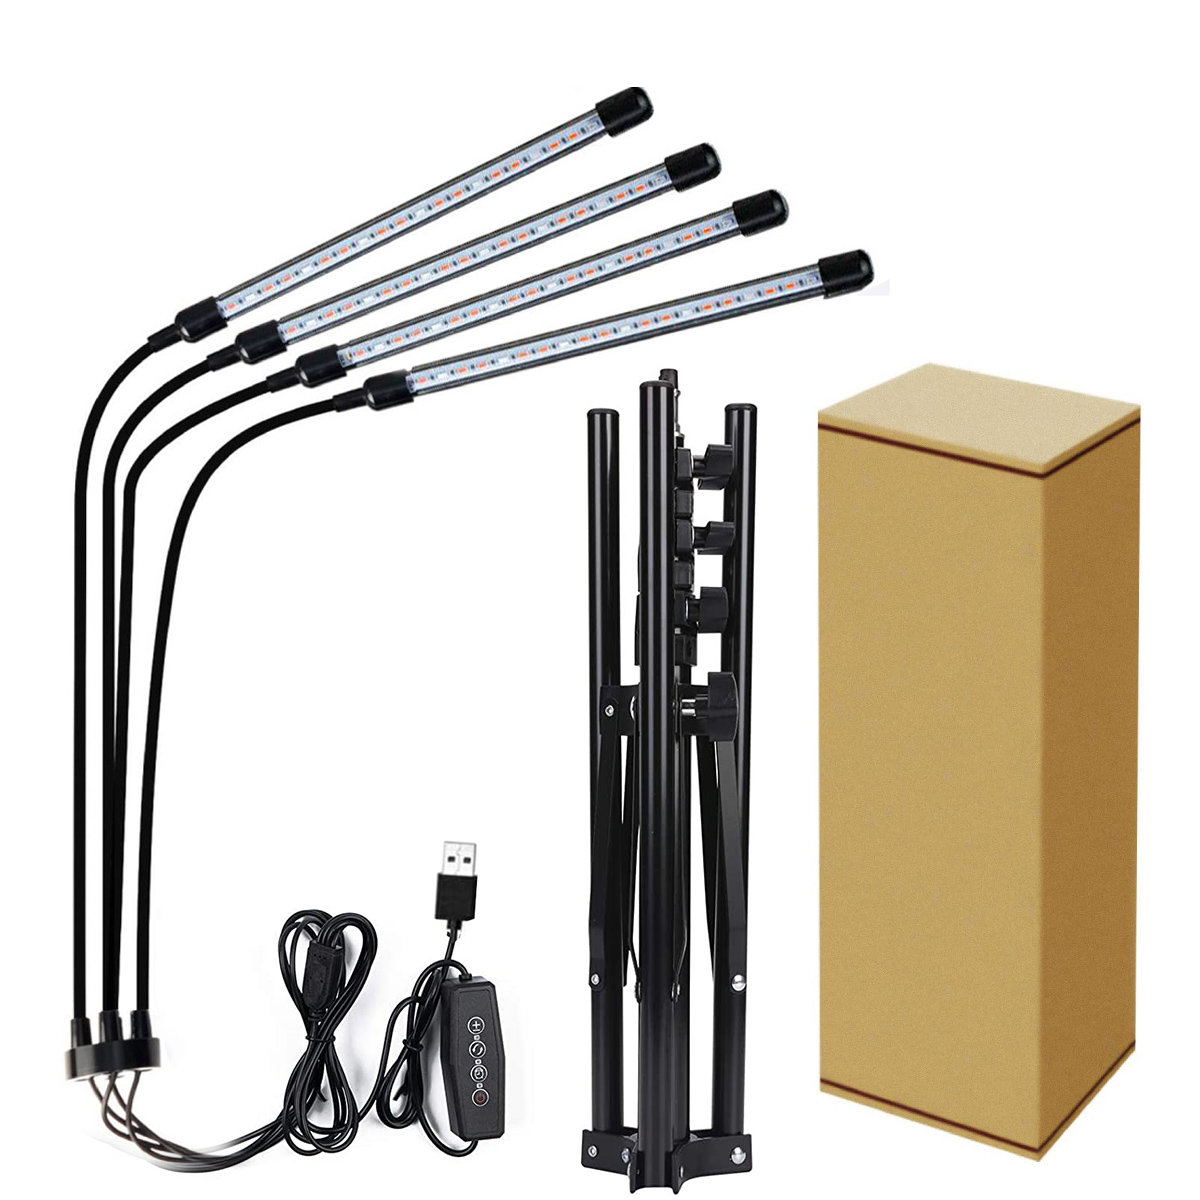 LED-Grow-Light-Tripod-Plant-Growing-Lamp-Lights-With-Tripod-For-Indoor-Plants-1836993-3